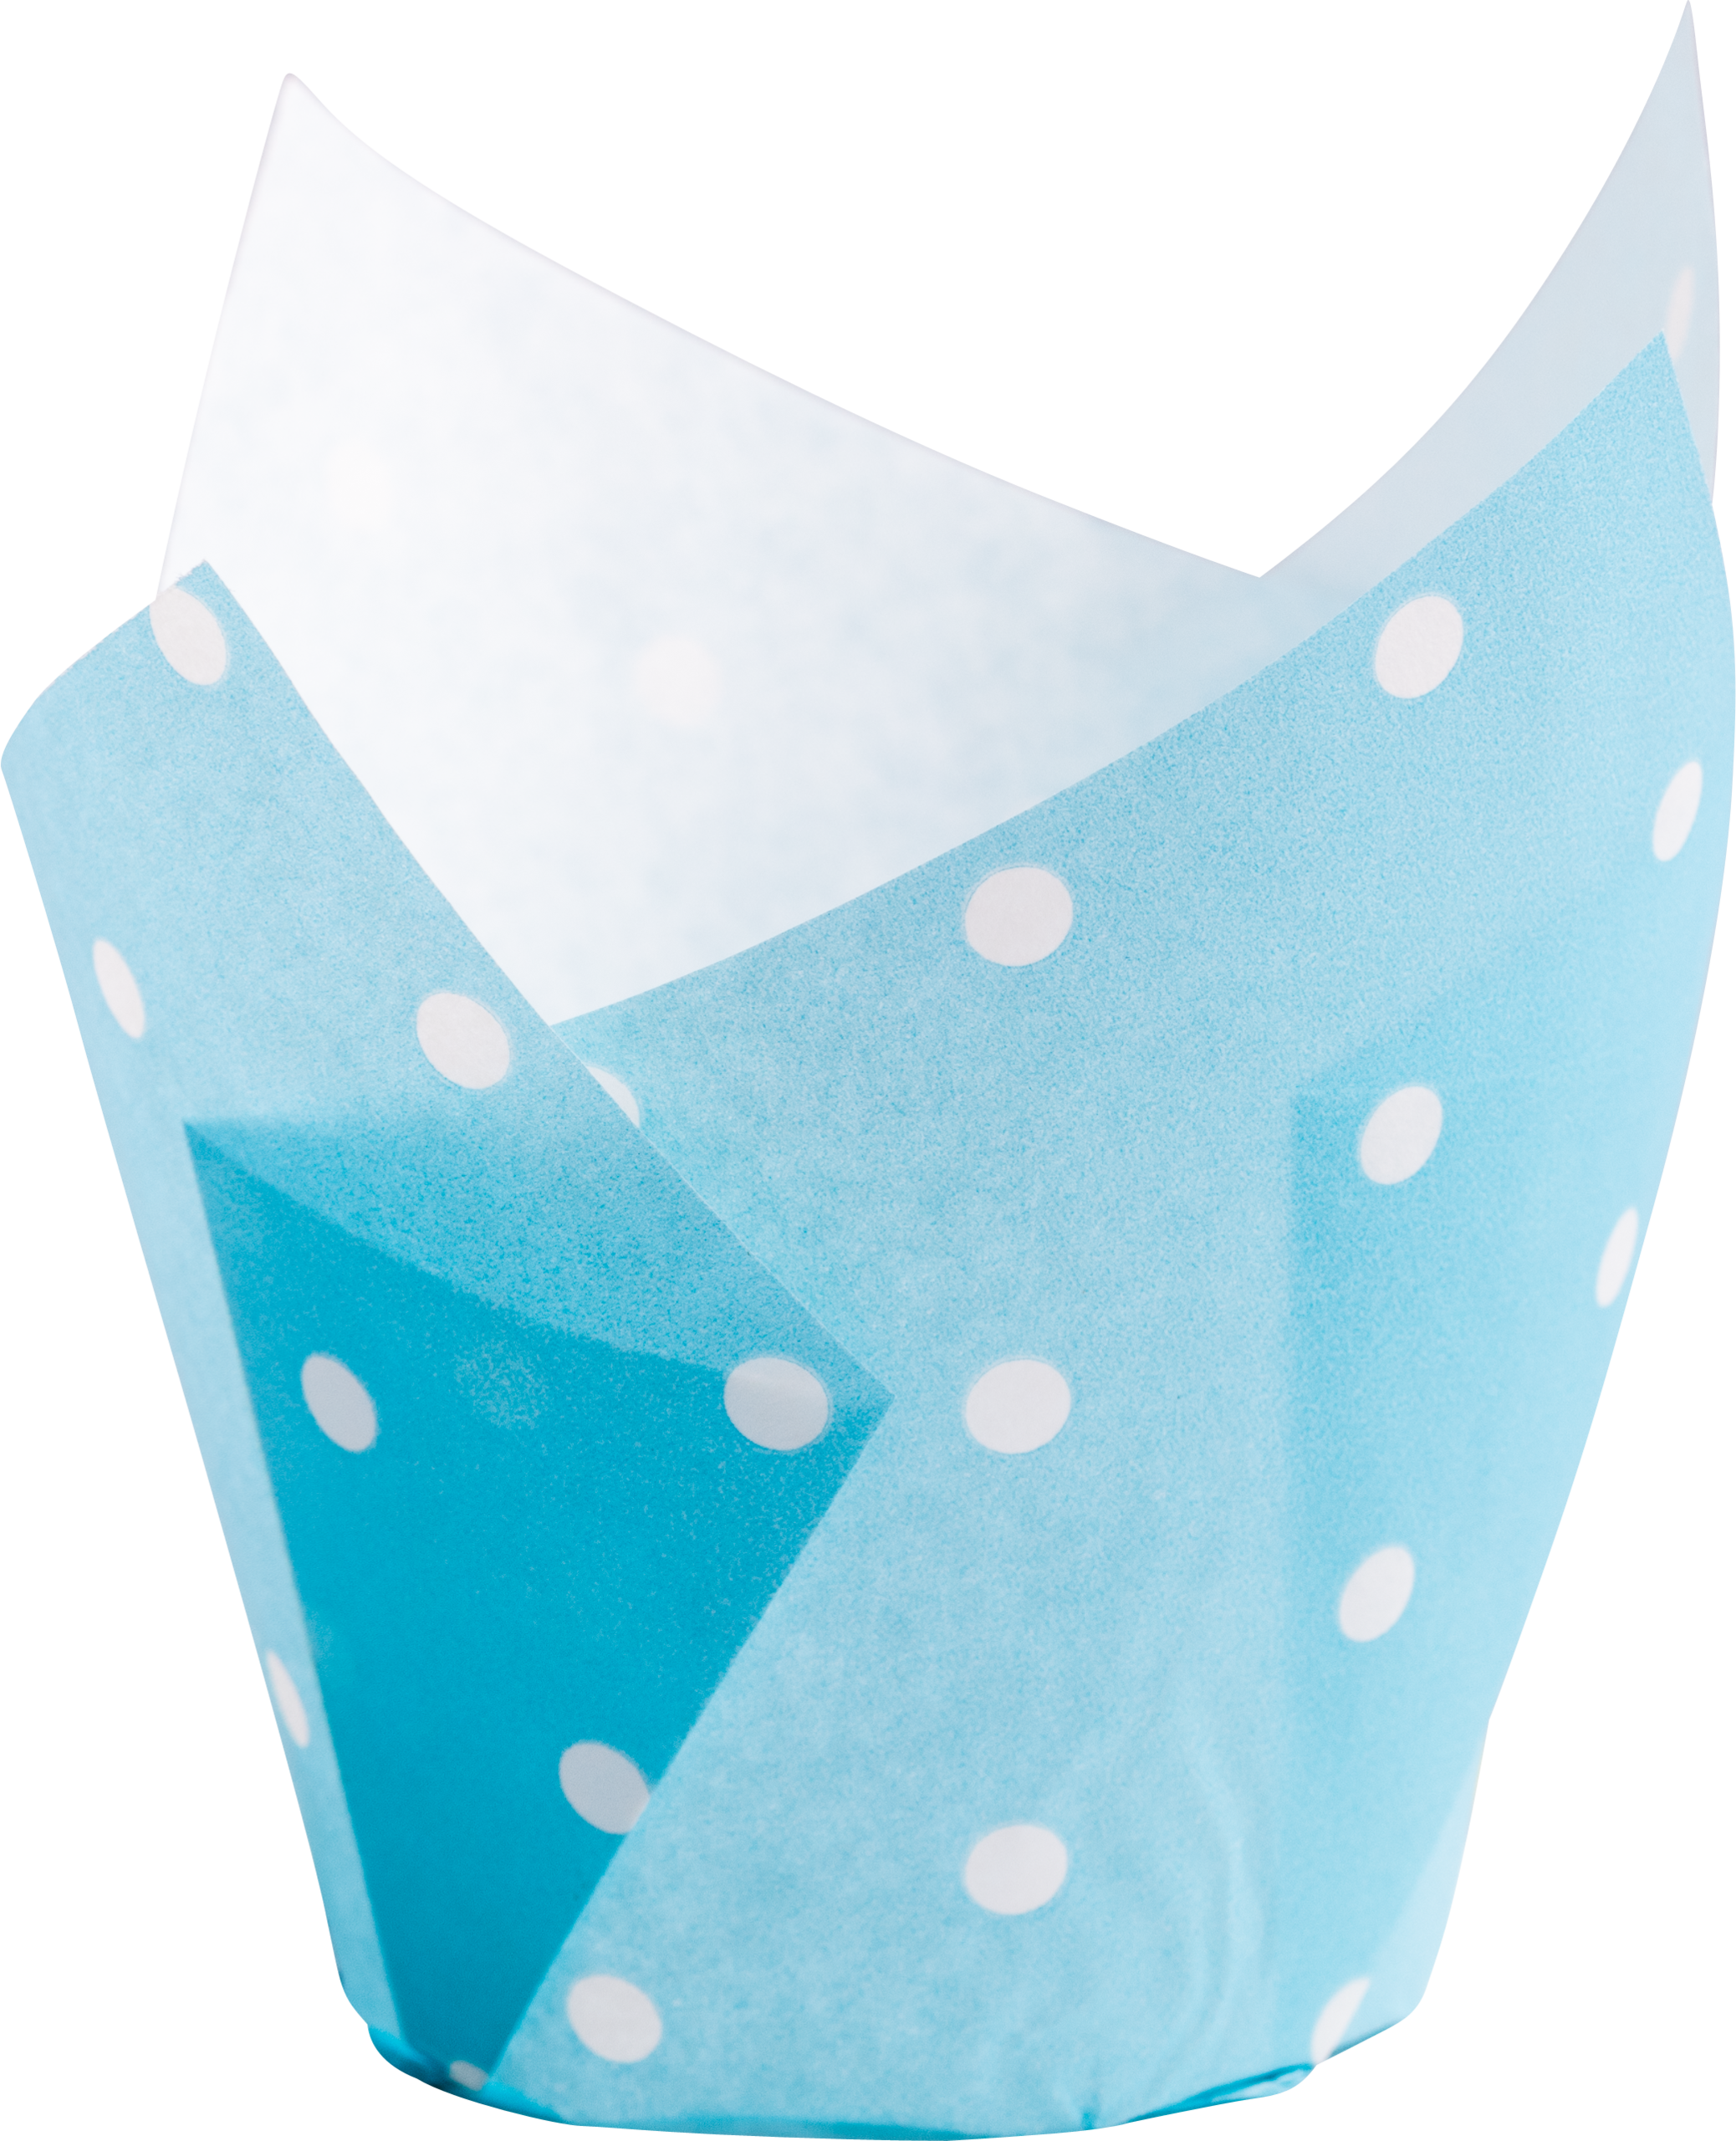 Muffin Tulip-Wrap white dots on turquoise • 16 x 16 cm